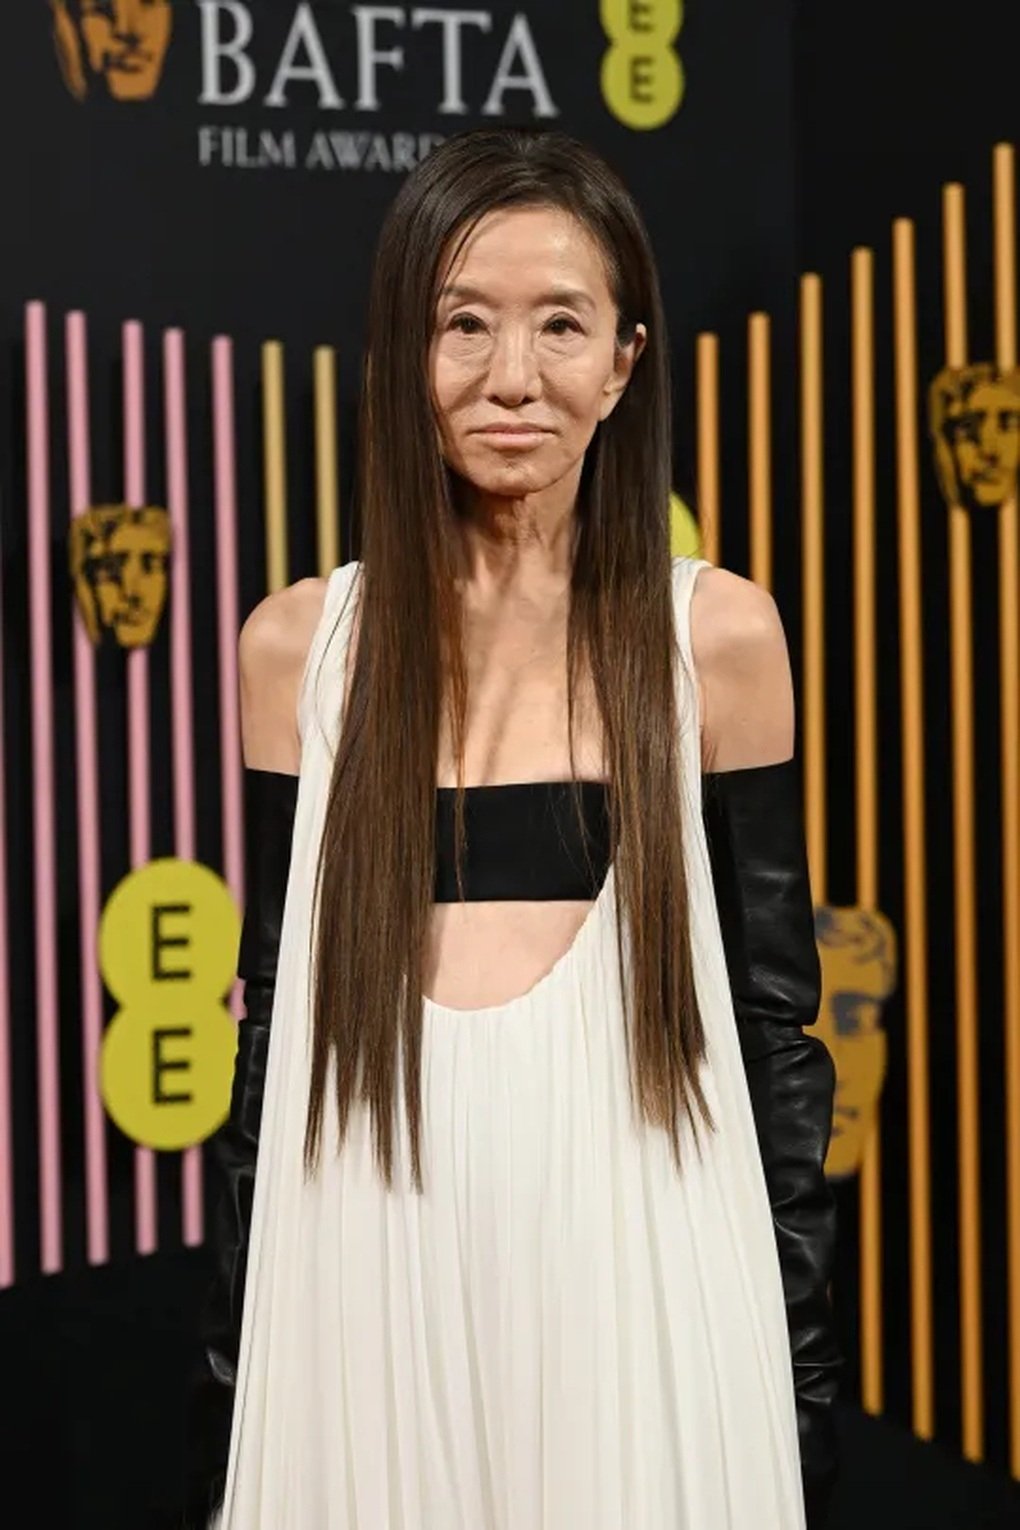 Designer Vera Wang’s `unbelievably young` appearance at the age of 75